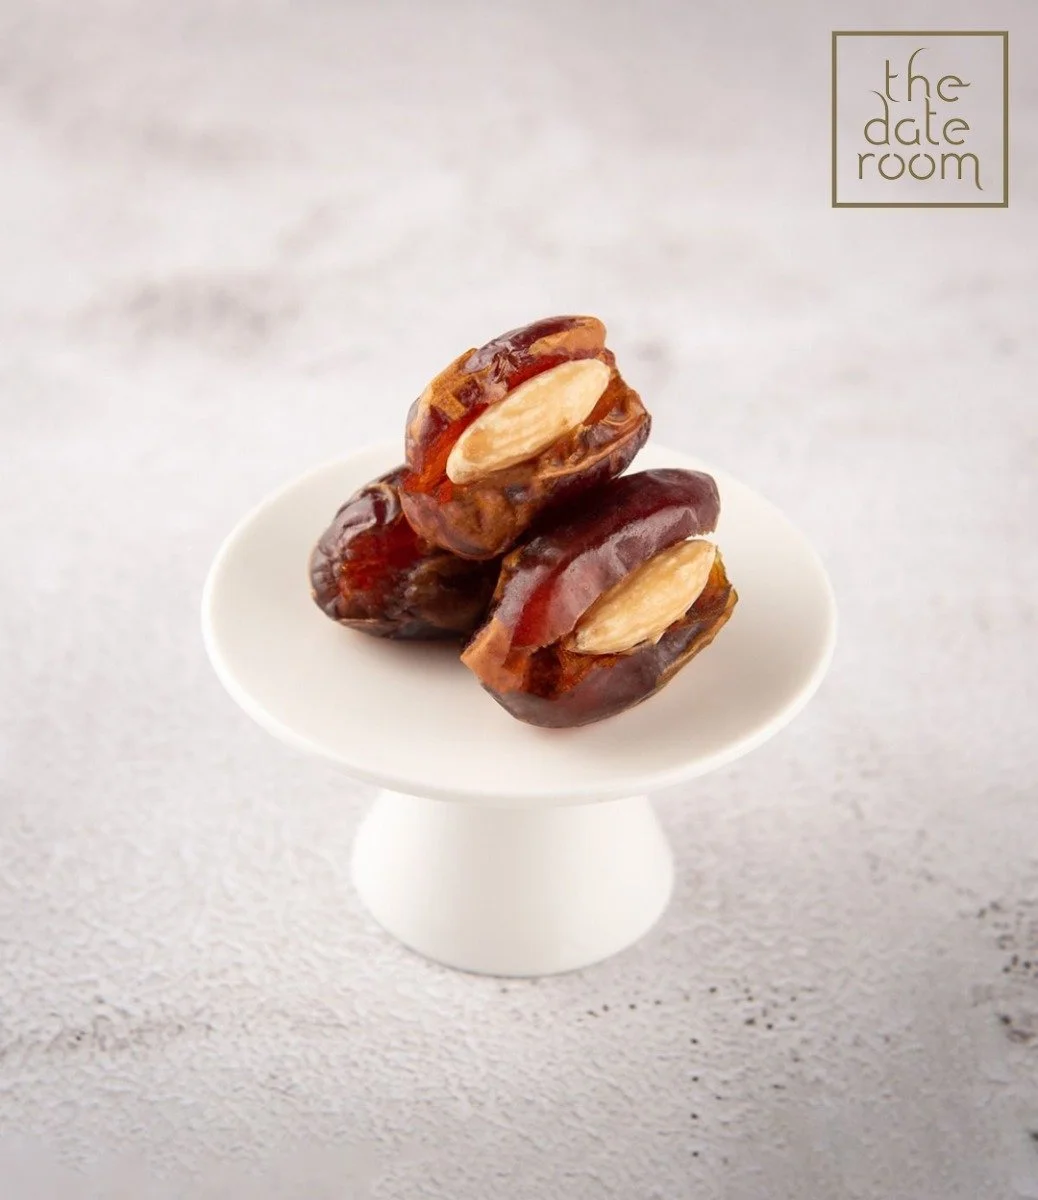 Kholas Dates stuffed with Roasted Almonds By The Date Room